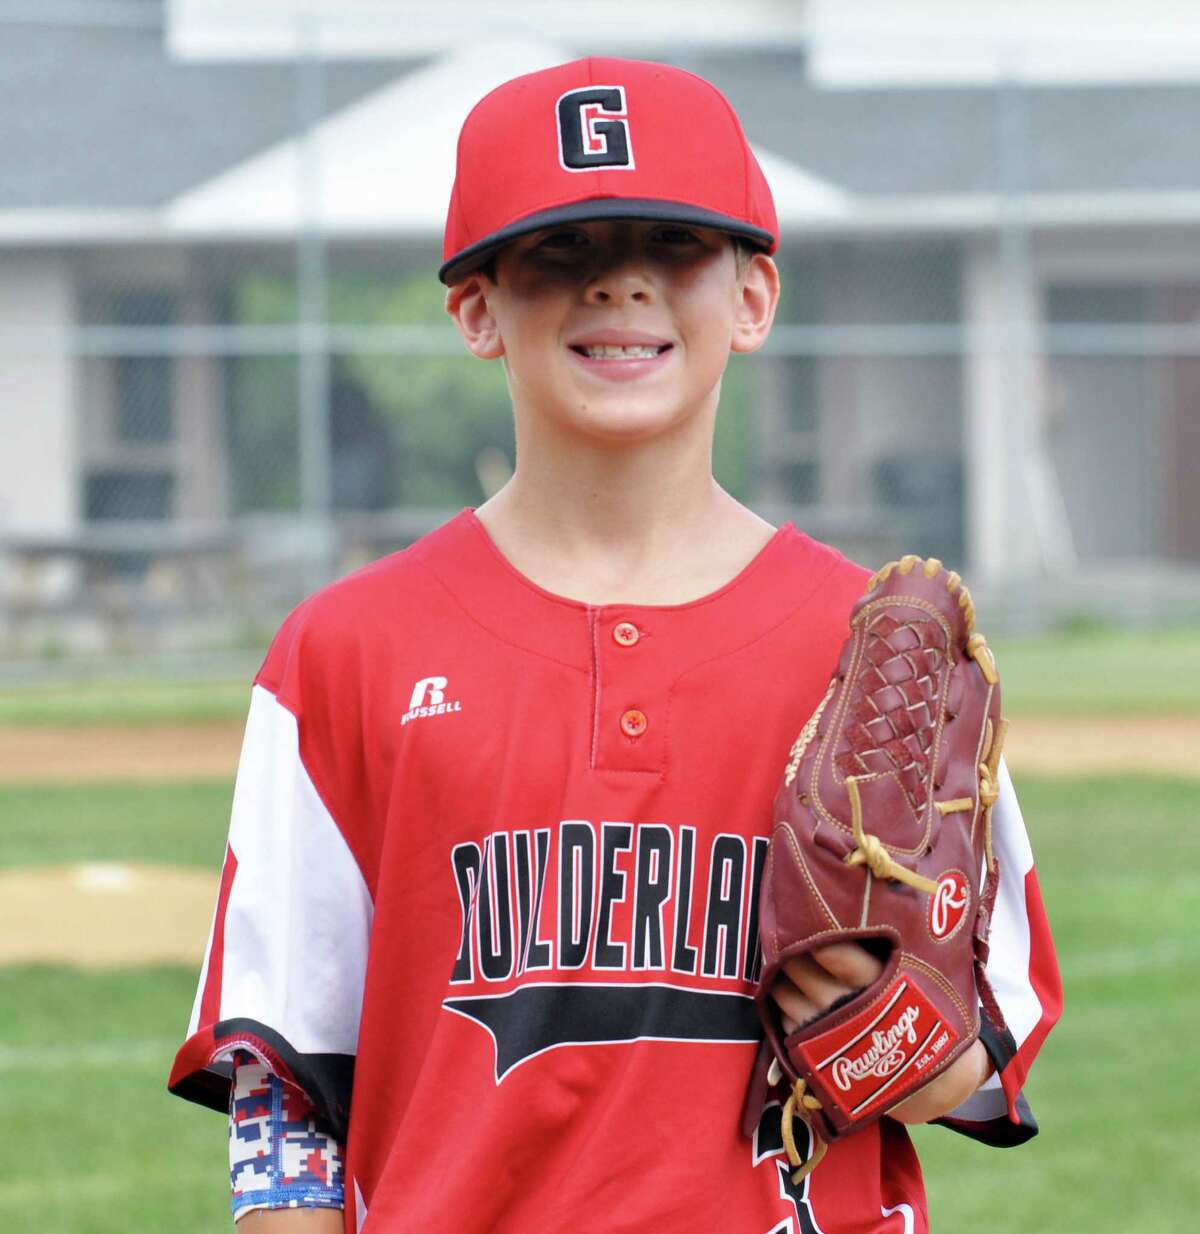 Slingerlands 8-year-old to compete at MLB All-Star game